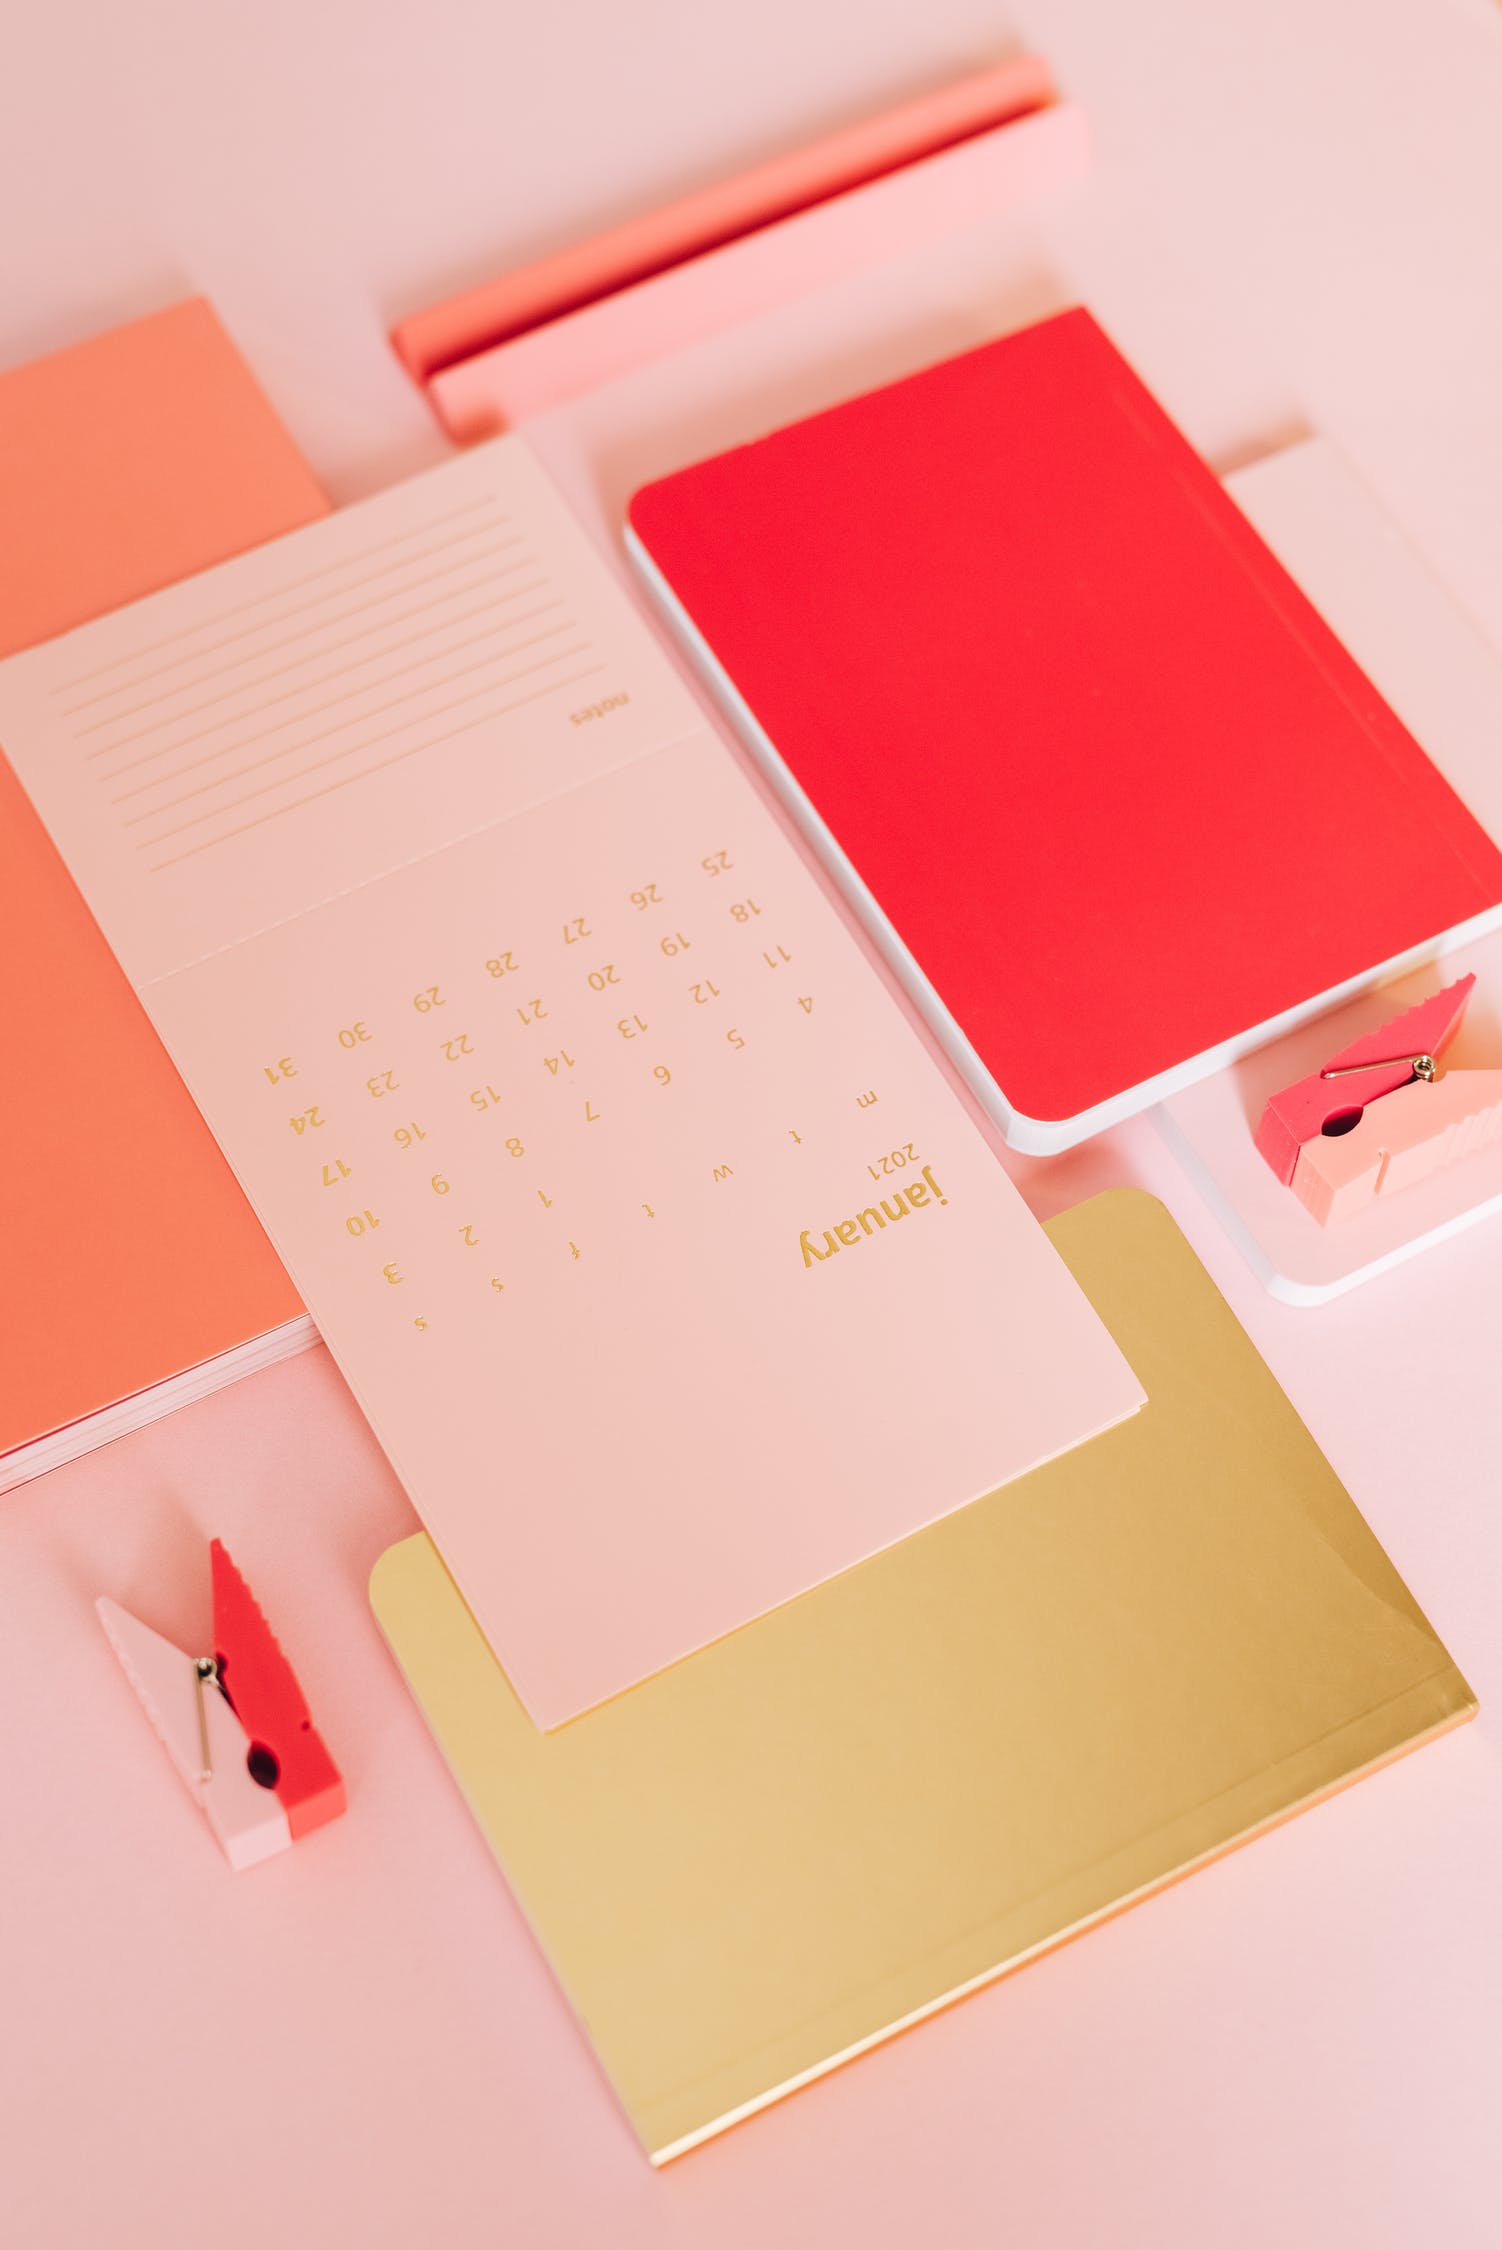 Printed calendar and stationery with foil stamping